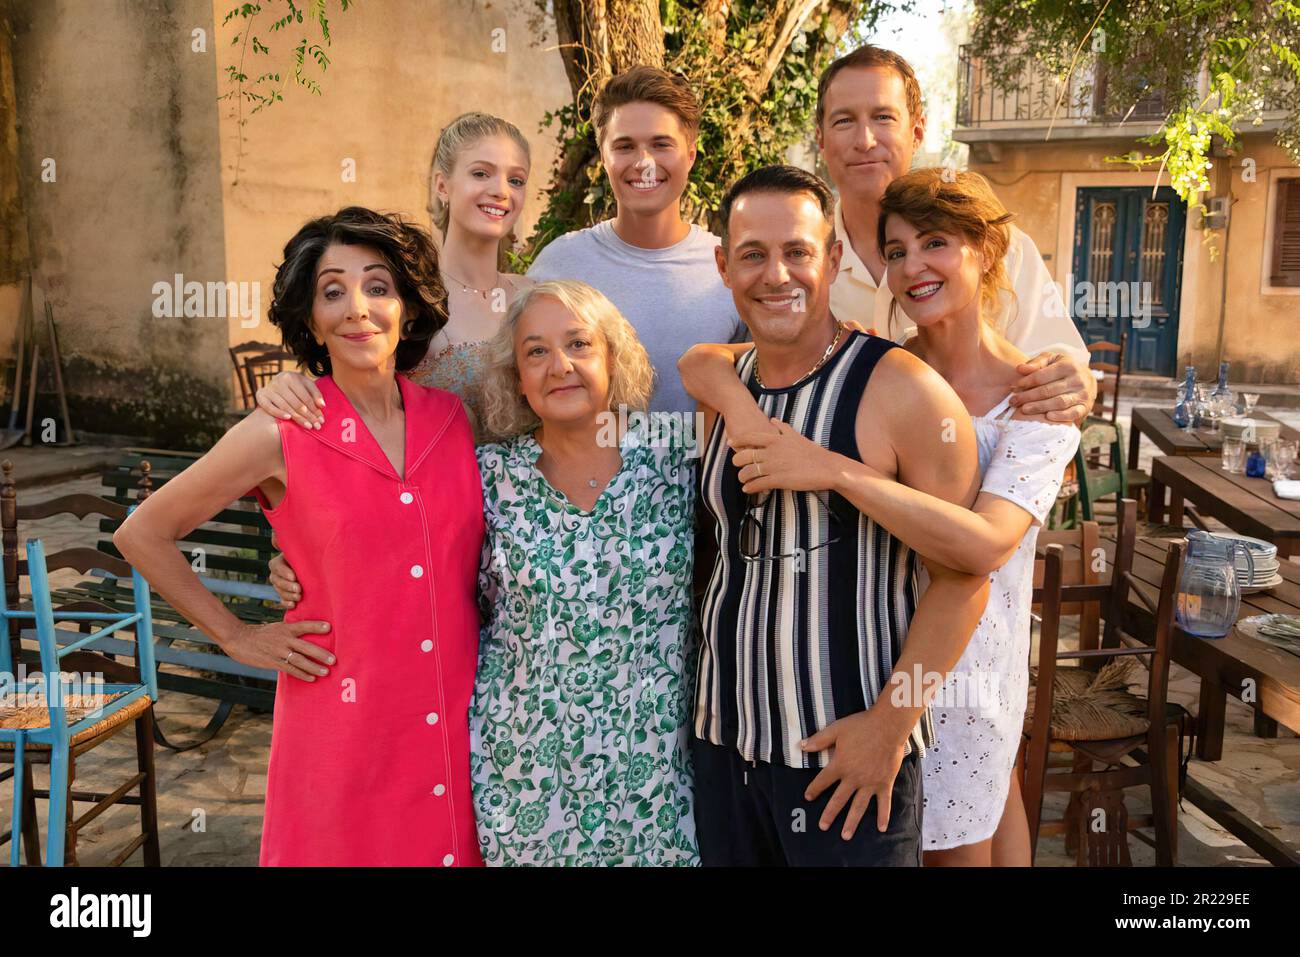 RELEASE DATE: September 8, 2023. TITLE: My Big Fat Greek Wedding 3. STUDIO: Focus Features. DIRECTOR: Nia Vardalos. PLOT: Join the Portokalos family as they travel to a family reunion in Greece for a heartwarming and hilarious trip full of love, twists and turns. STARRING: ELENA KAMPOURIS as Paris, ELIAS KACAVAS as Aristotle, ANDREA MARTIN as Aunt Voula, NIA VARDALOS as Toula, LOUIS MANDYLOR as Nick, JOHN CORBETT as Ian. (Credit Image: © Focus Features/Entertainment Pictures/ZUMAPRESS.com) EDITORIAL USAGE ONLY! Not for Commercial USAGE! Stock Photo